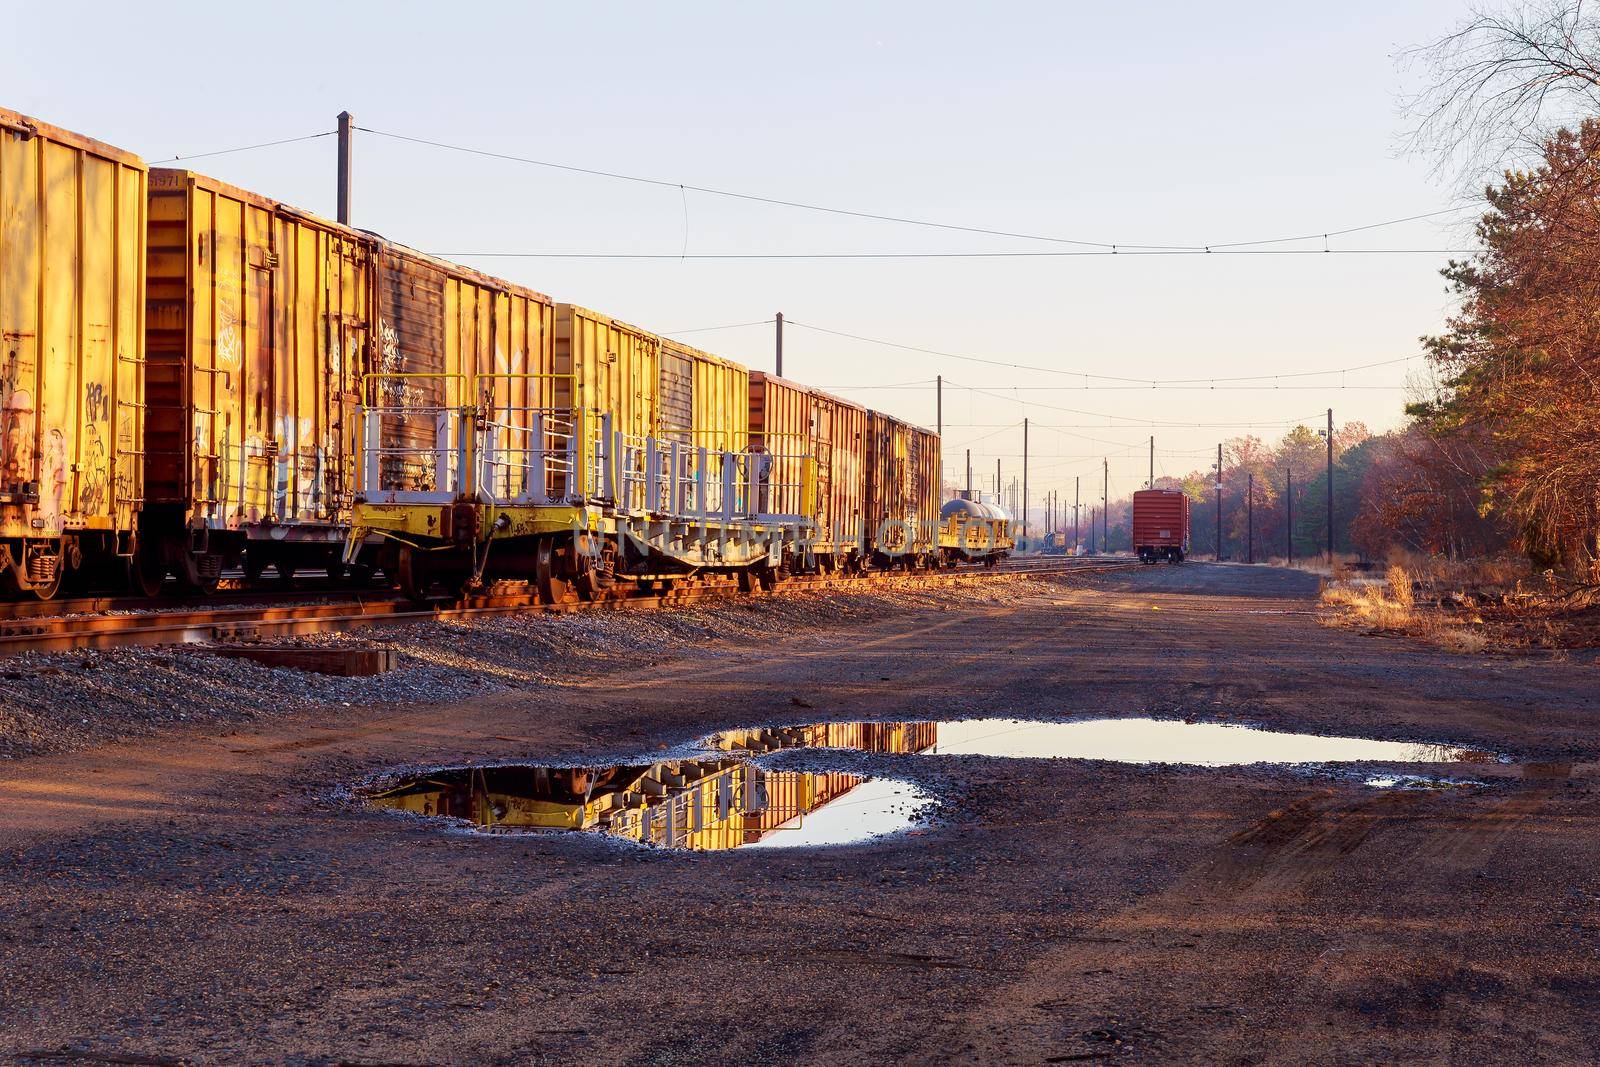 Railway cars stand on cargo station in USA by ungvar